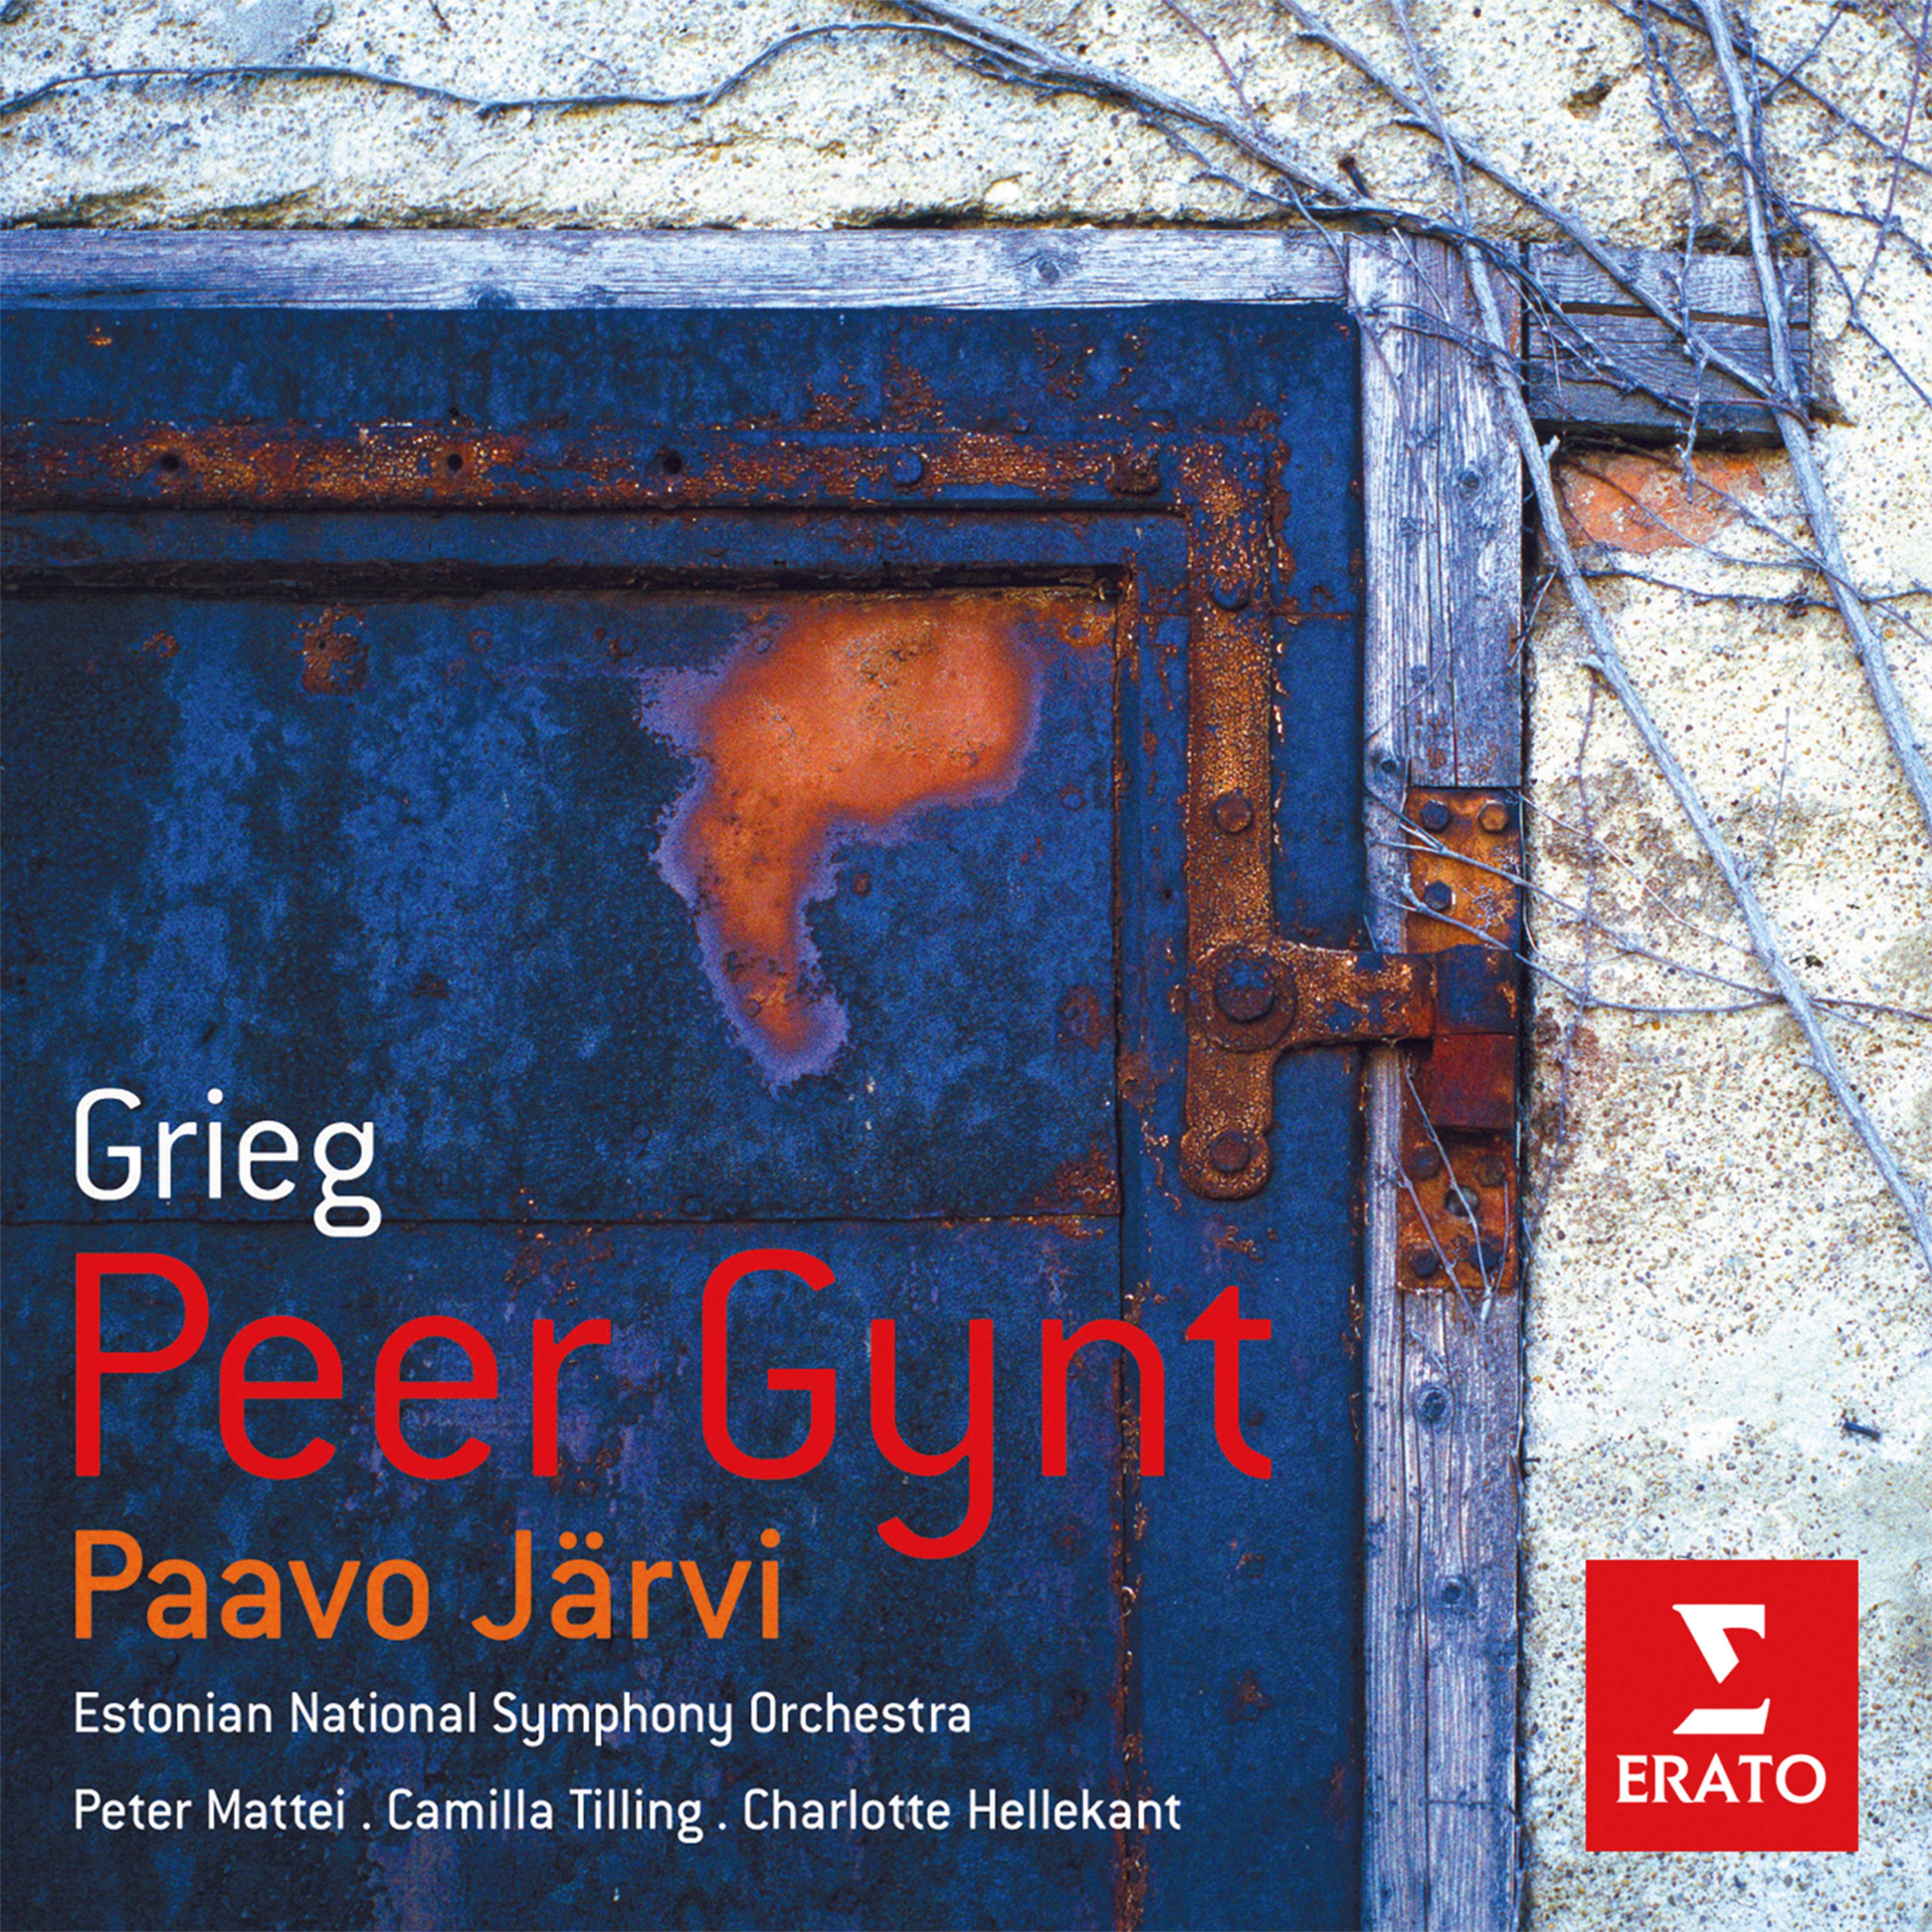 Peer Gynt, Op. 23, Act IV:No. 16, Anitra's Dance